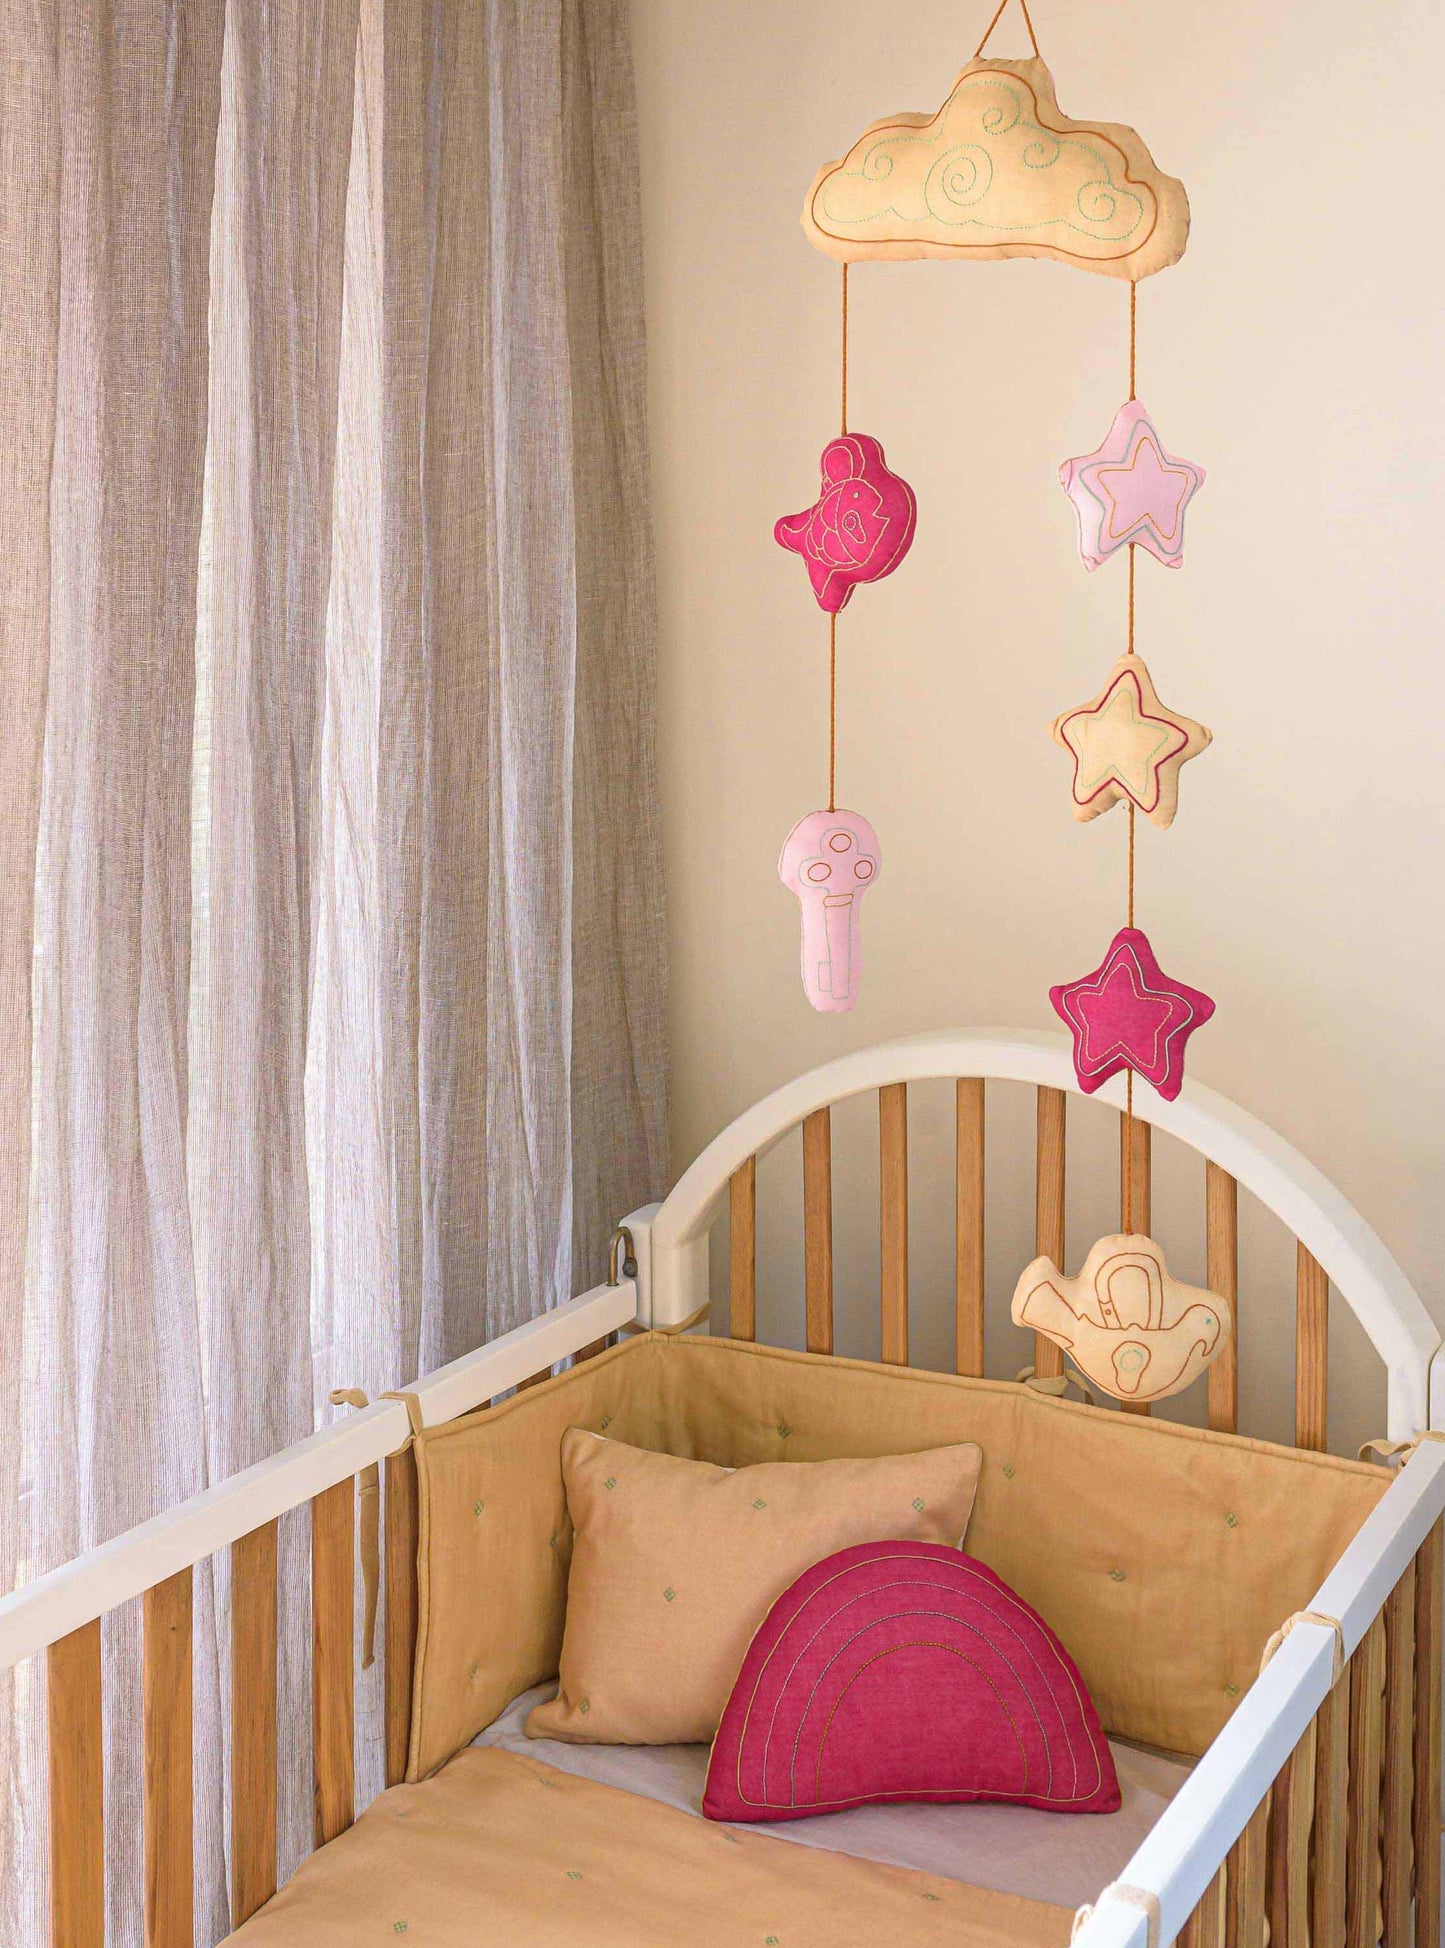 Wheat Bandook pillow, bumper, blanket and the Fuchsia Rainbow cushion and a Wheat Moshkel Gosha mobile placed in a nursery baby room